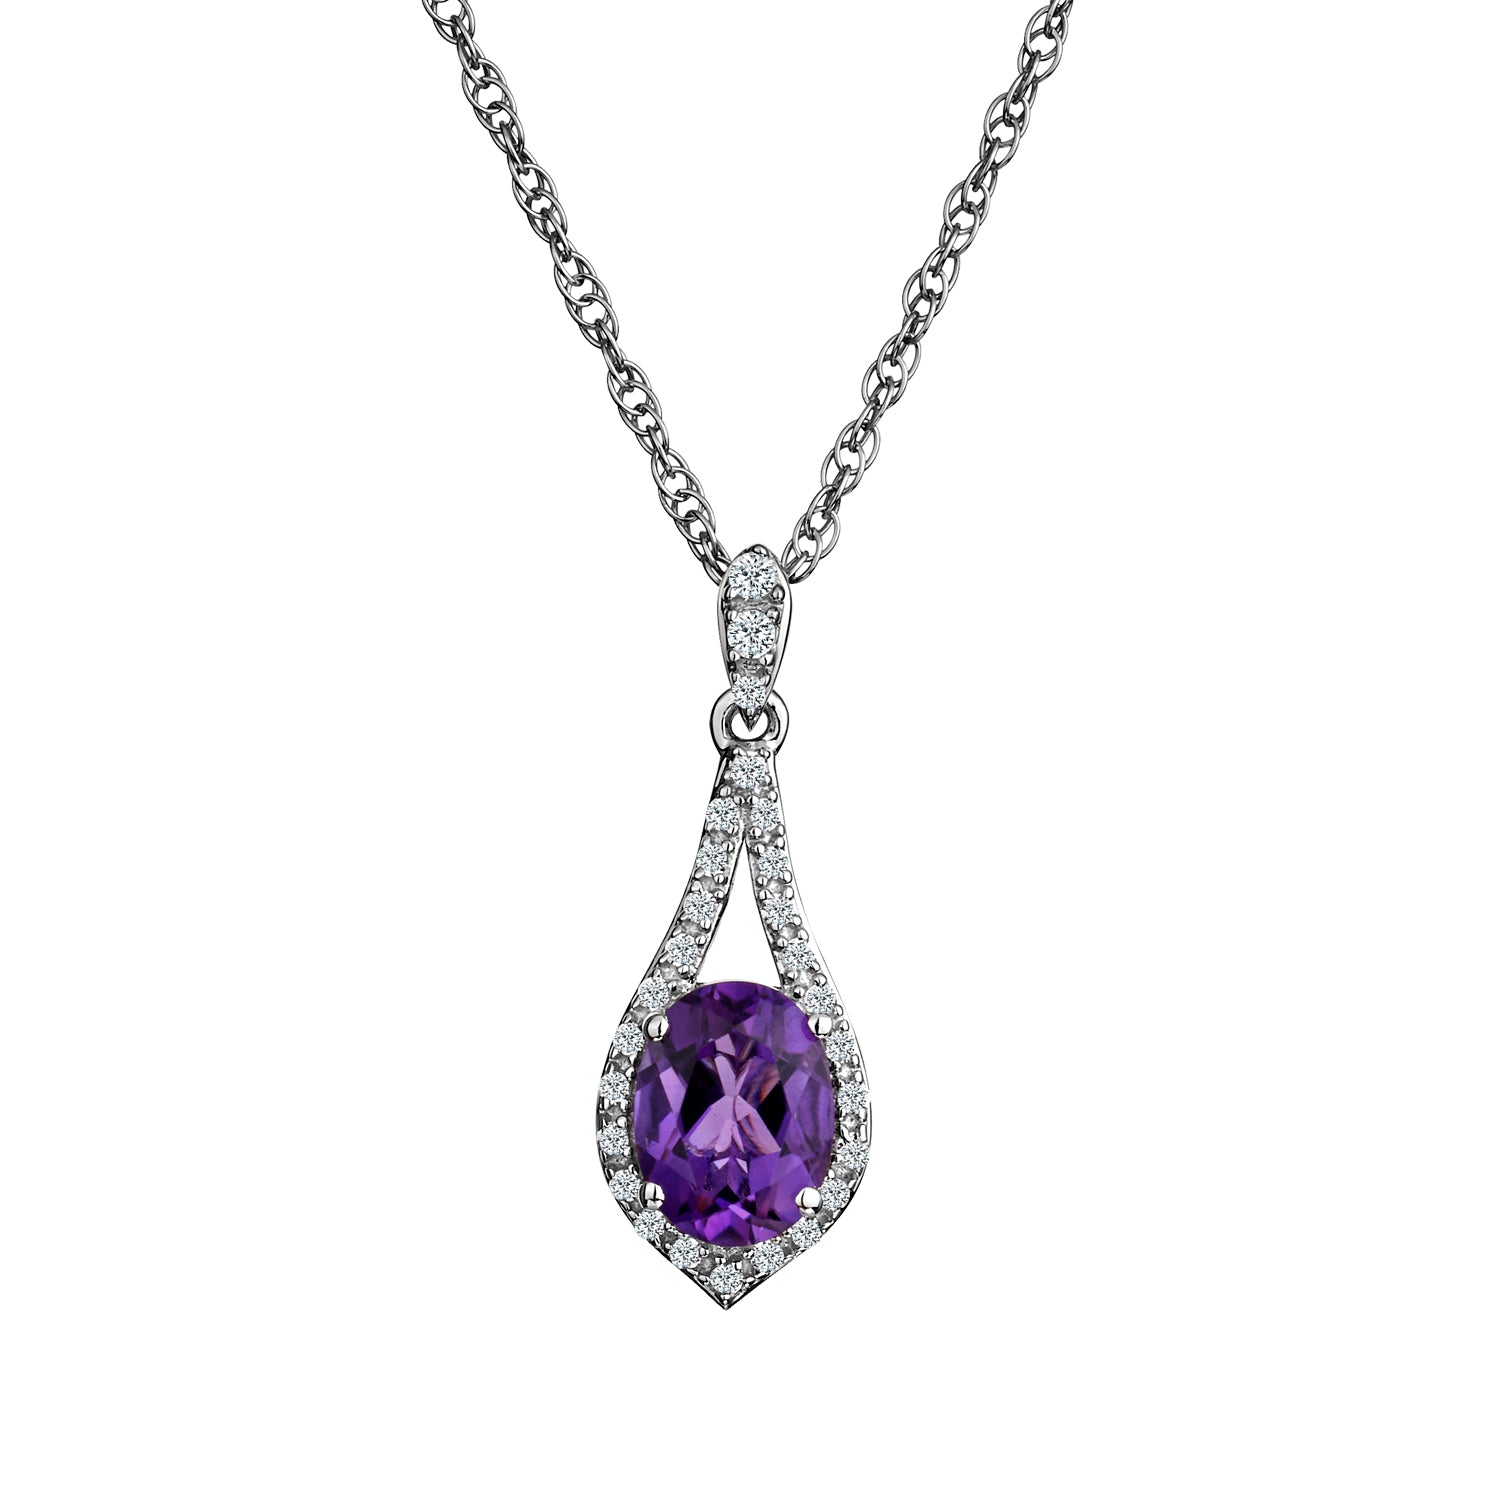 Amethyst and Created White Sapphire Pendant,  Sterling Silver. Necklaces and Pendants. Griffin Jewellery Designs. 